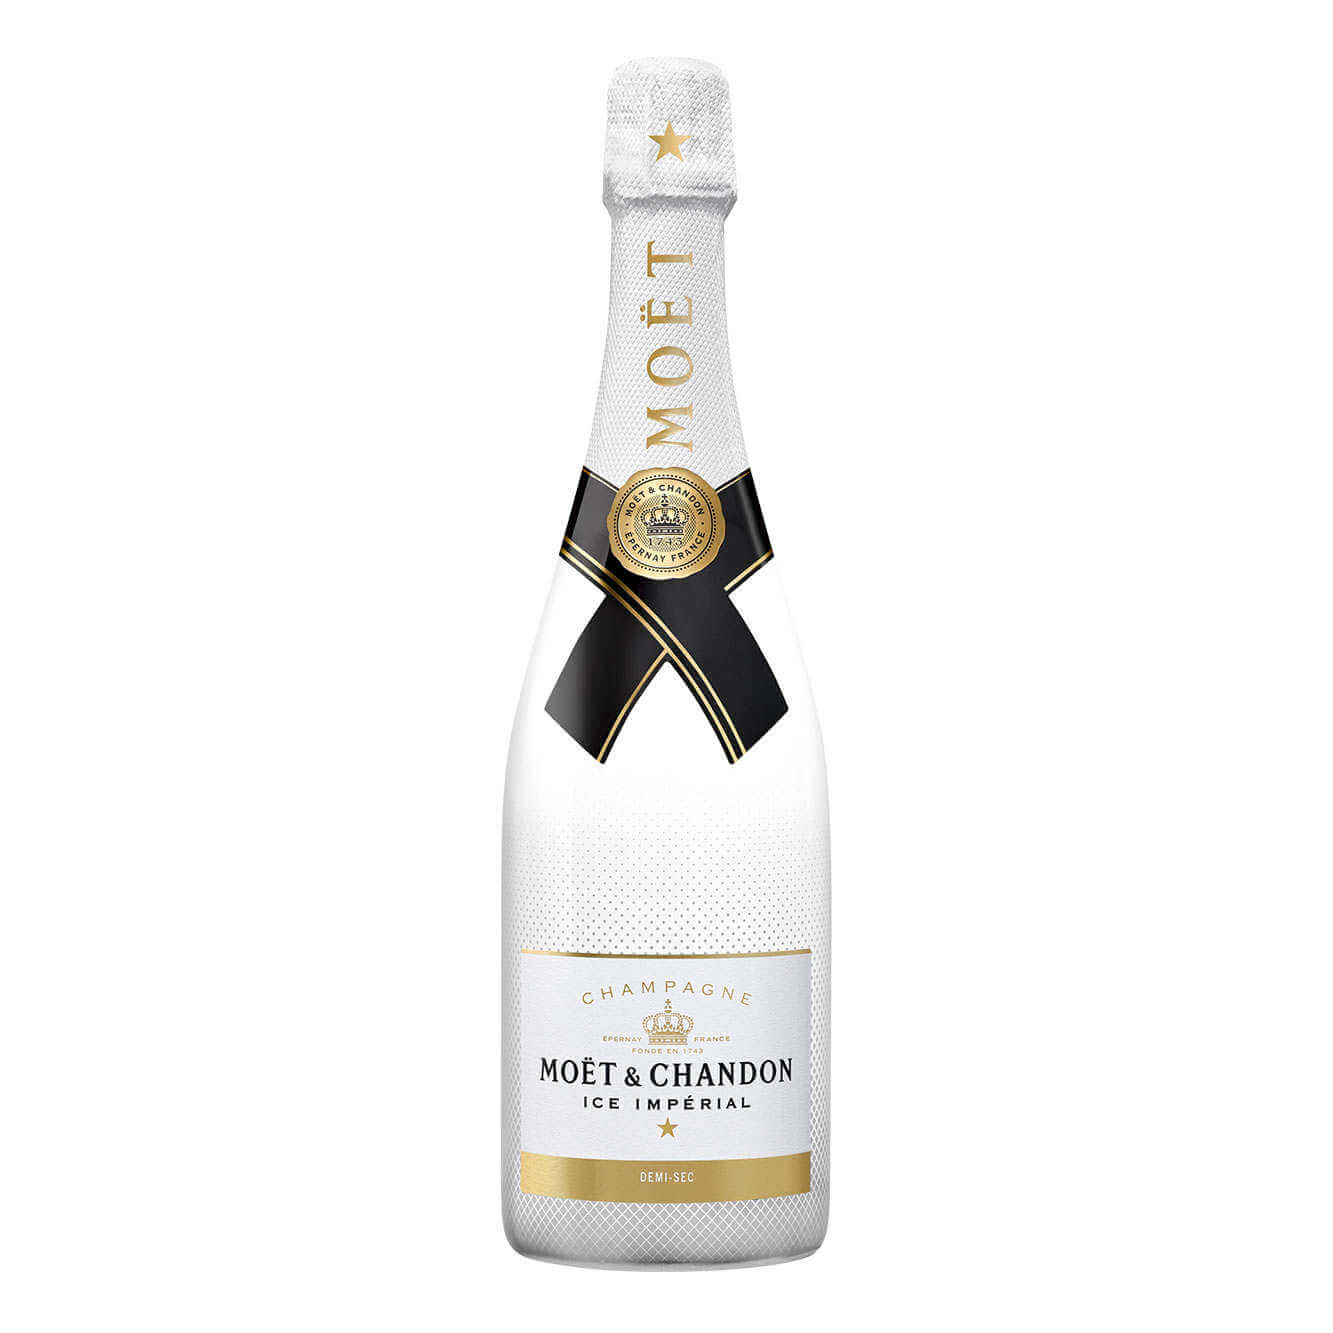 37104-0w0h0_Moet_Ice_Imperial_Champagne